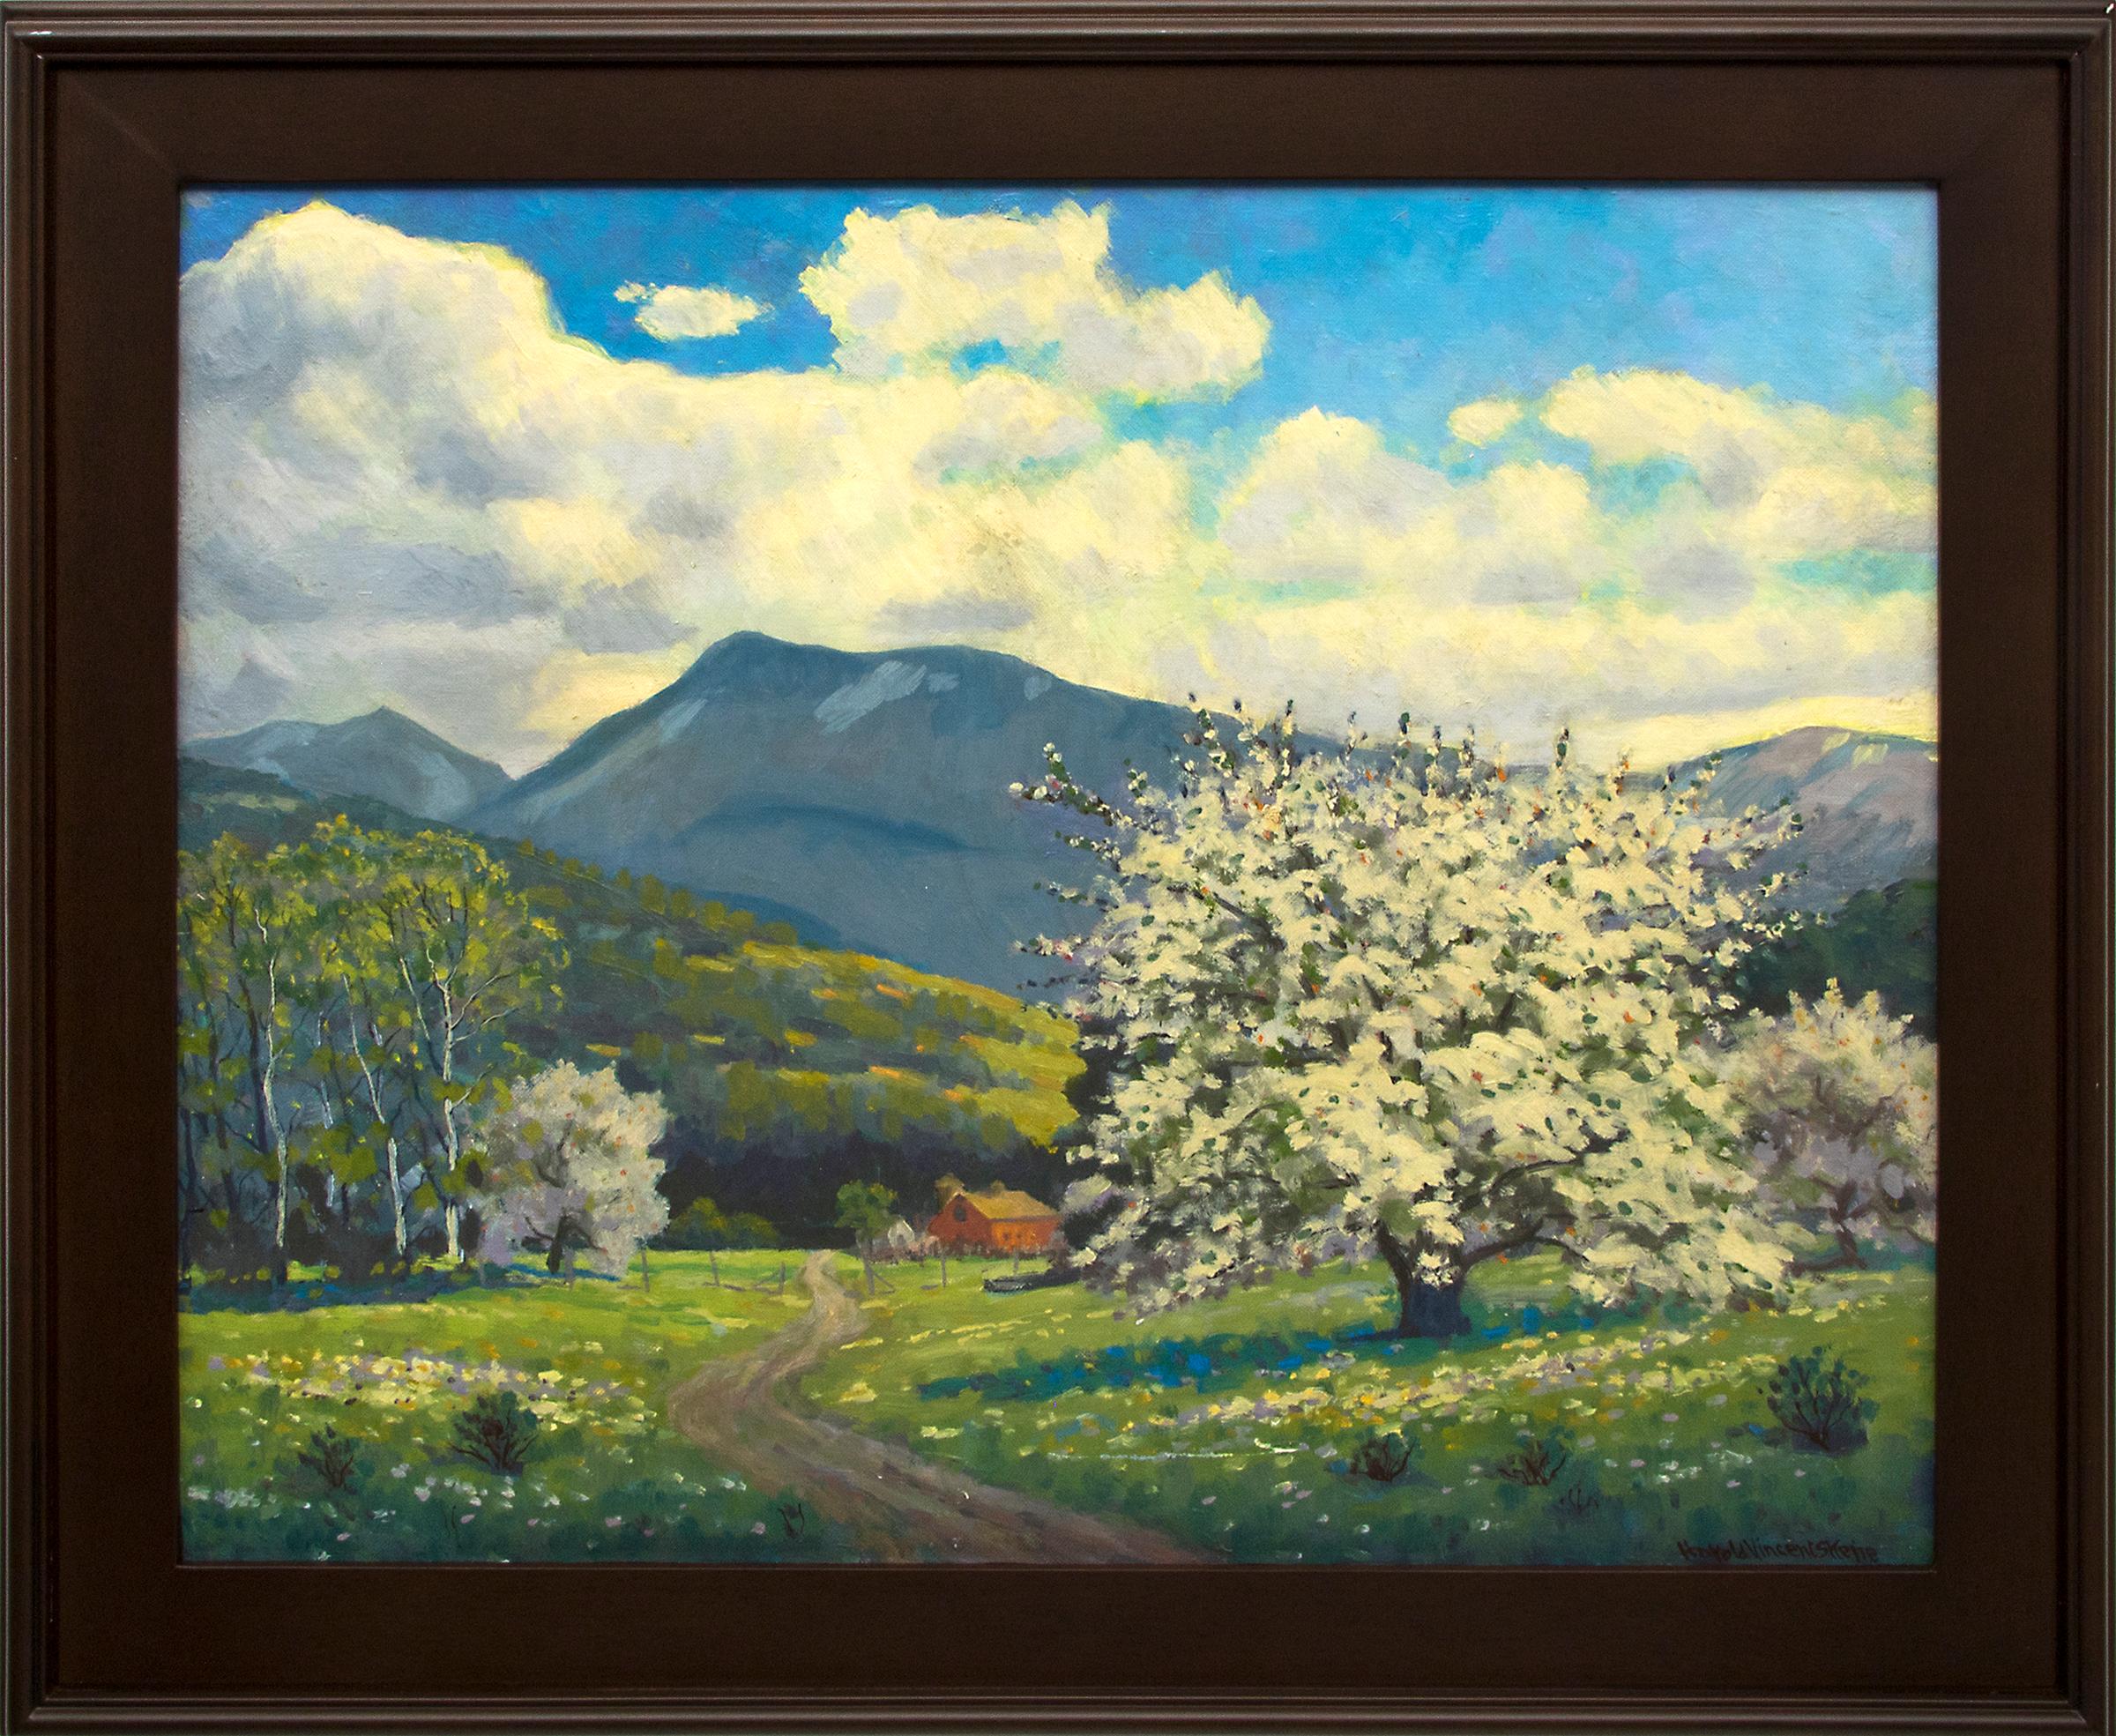 Apple Tree (Colorado Mountain Landscape, Blossoms, Spring on the Western Slope)